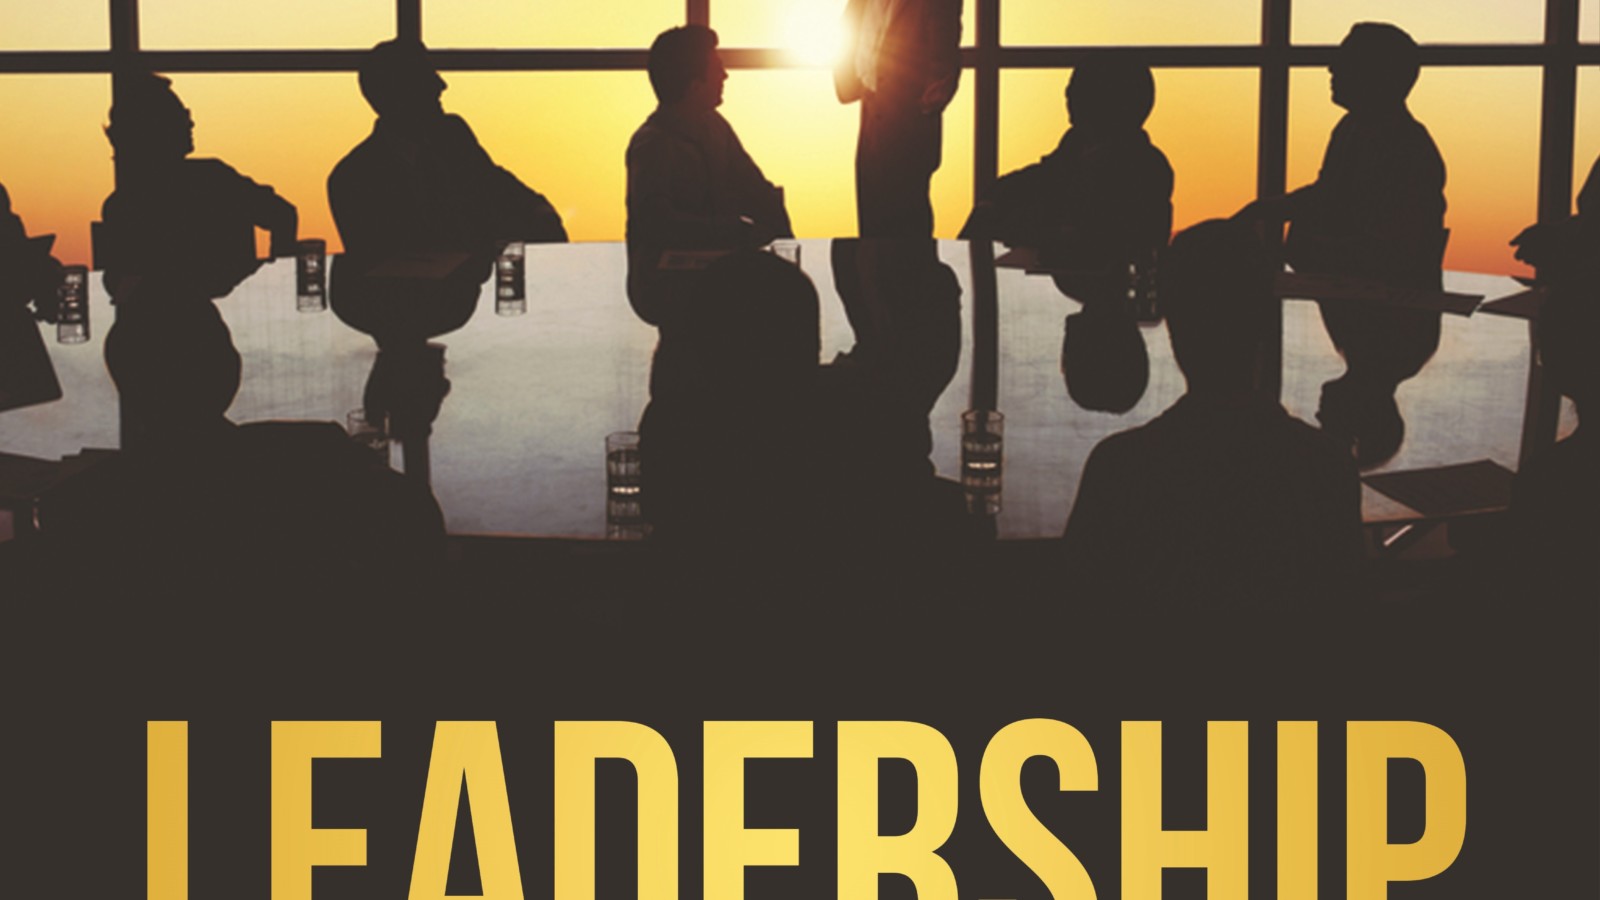 case study related to leadership